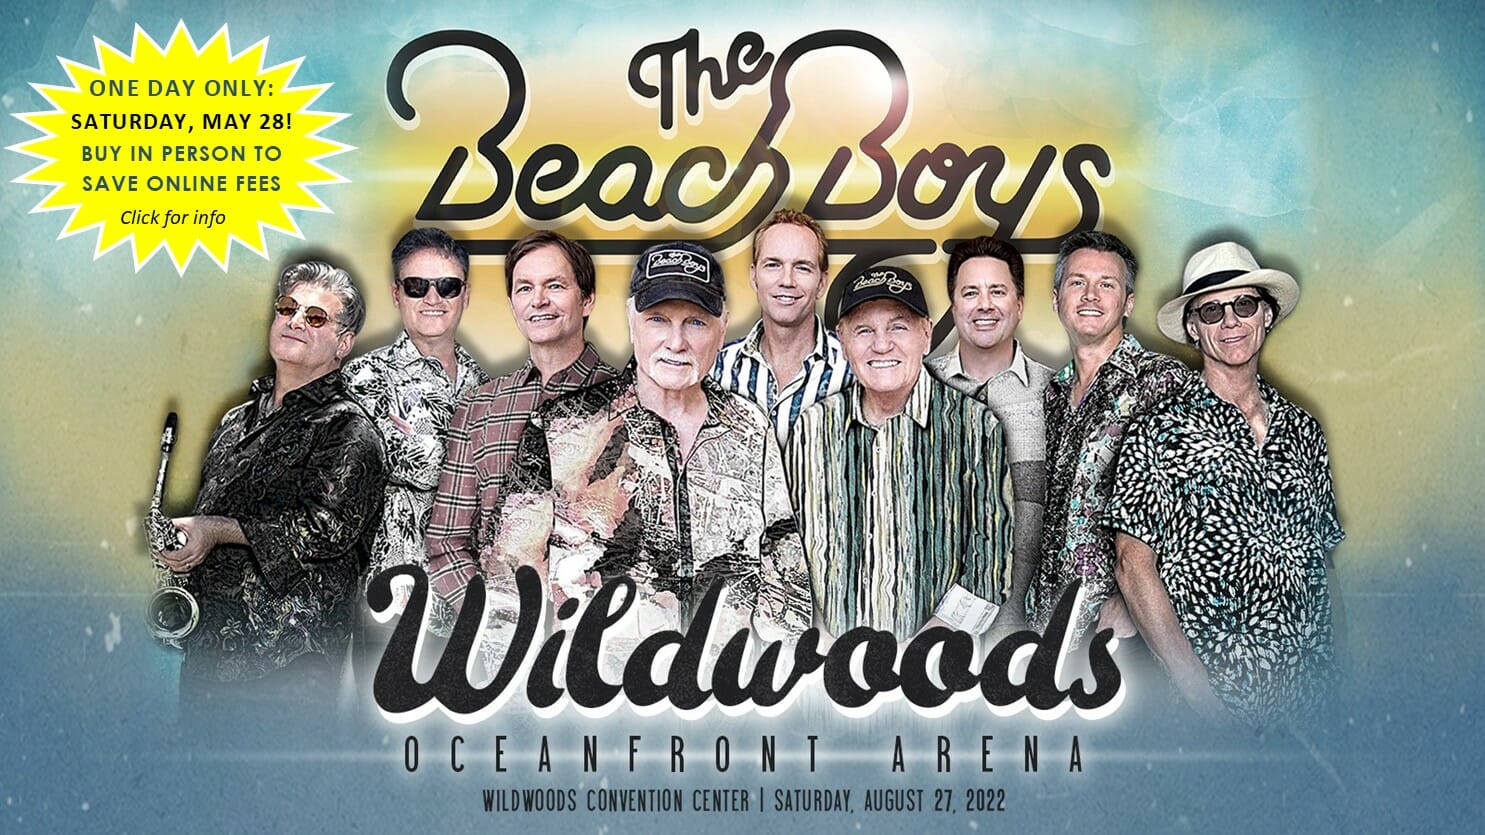 Beach Boys One Day In-Person Sales